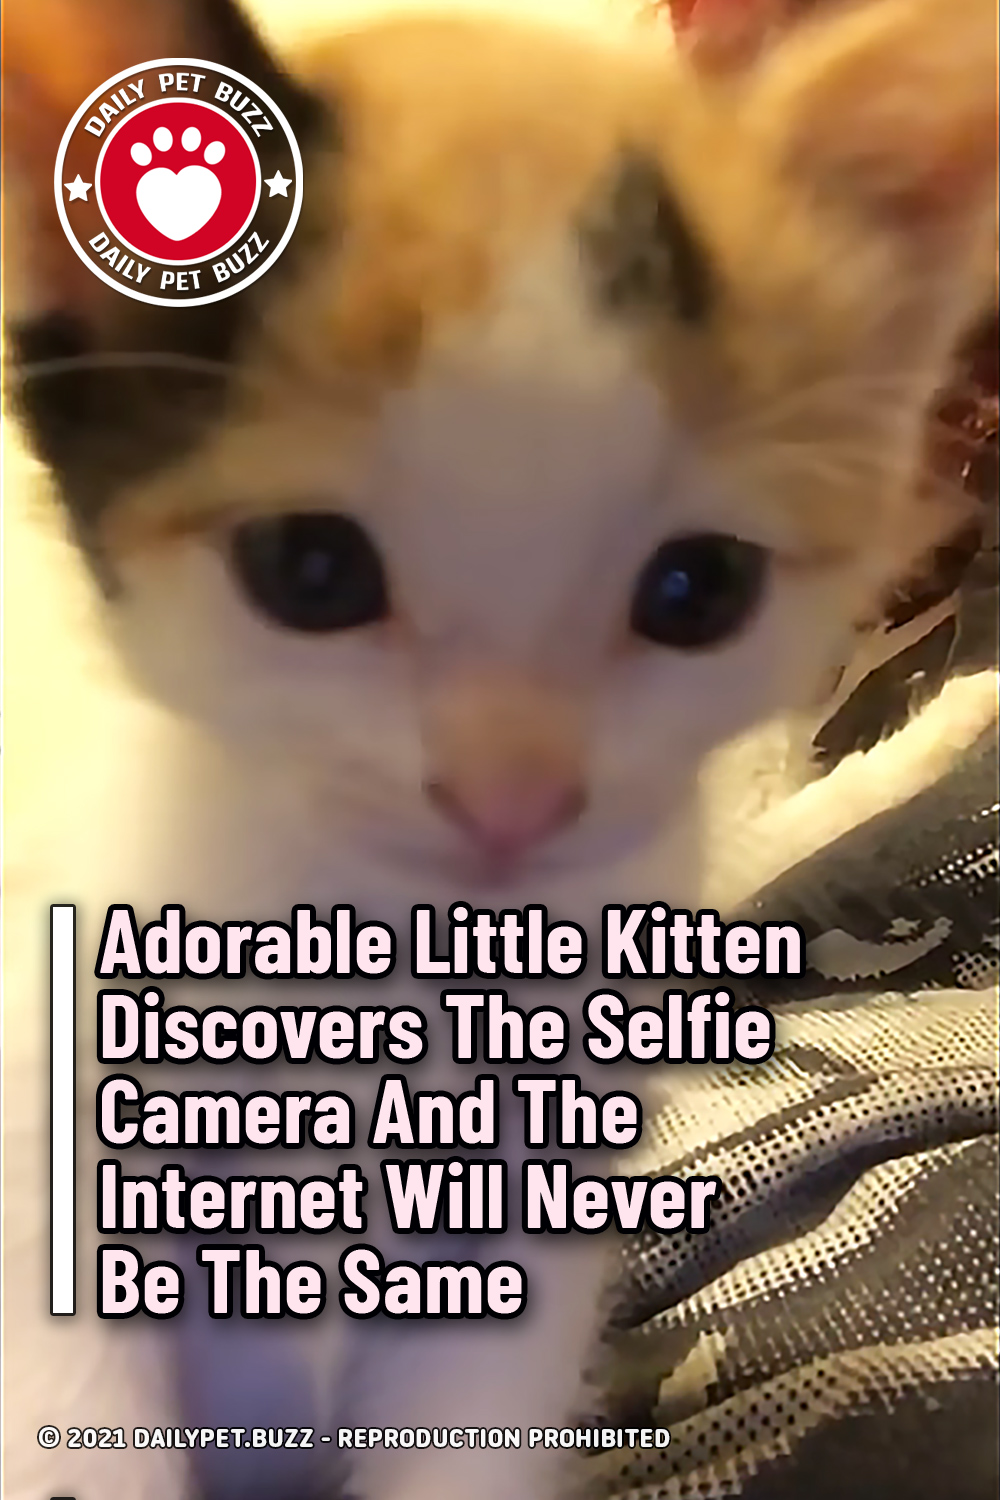 Adorable Little Kitten Discovers The Selfie Camera And The Internet Will Never Be The Same